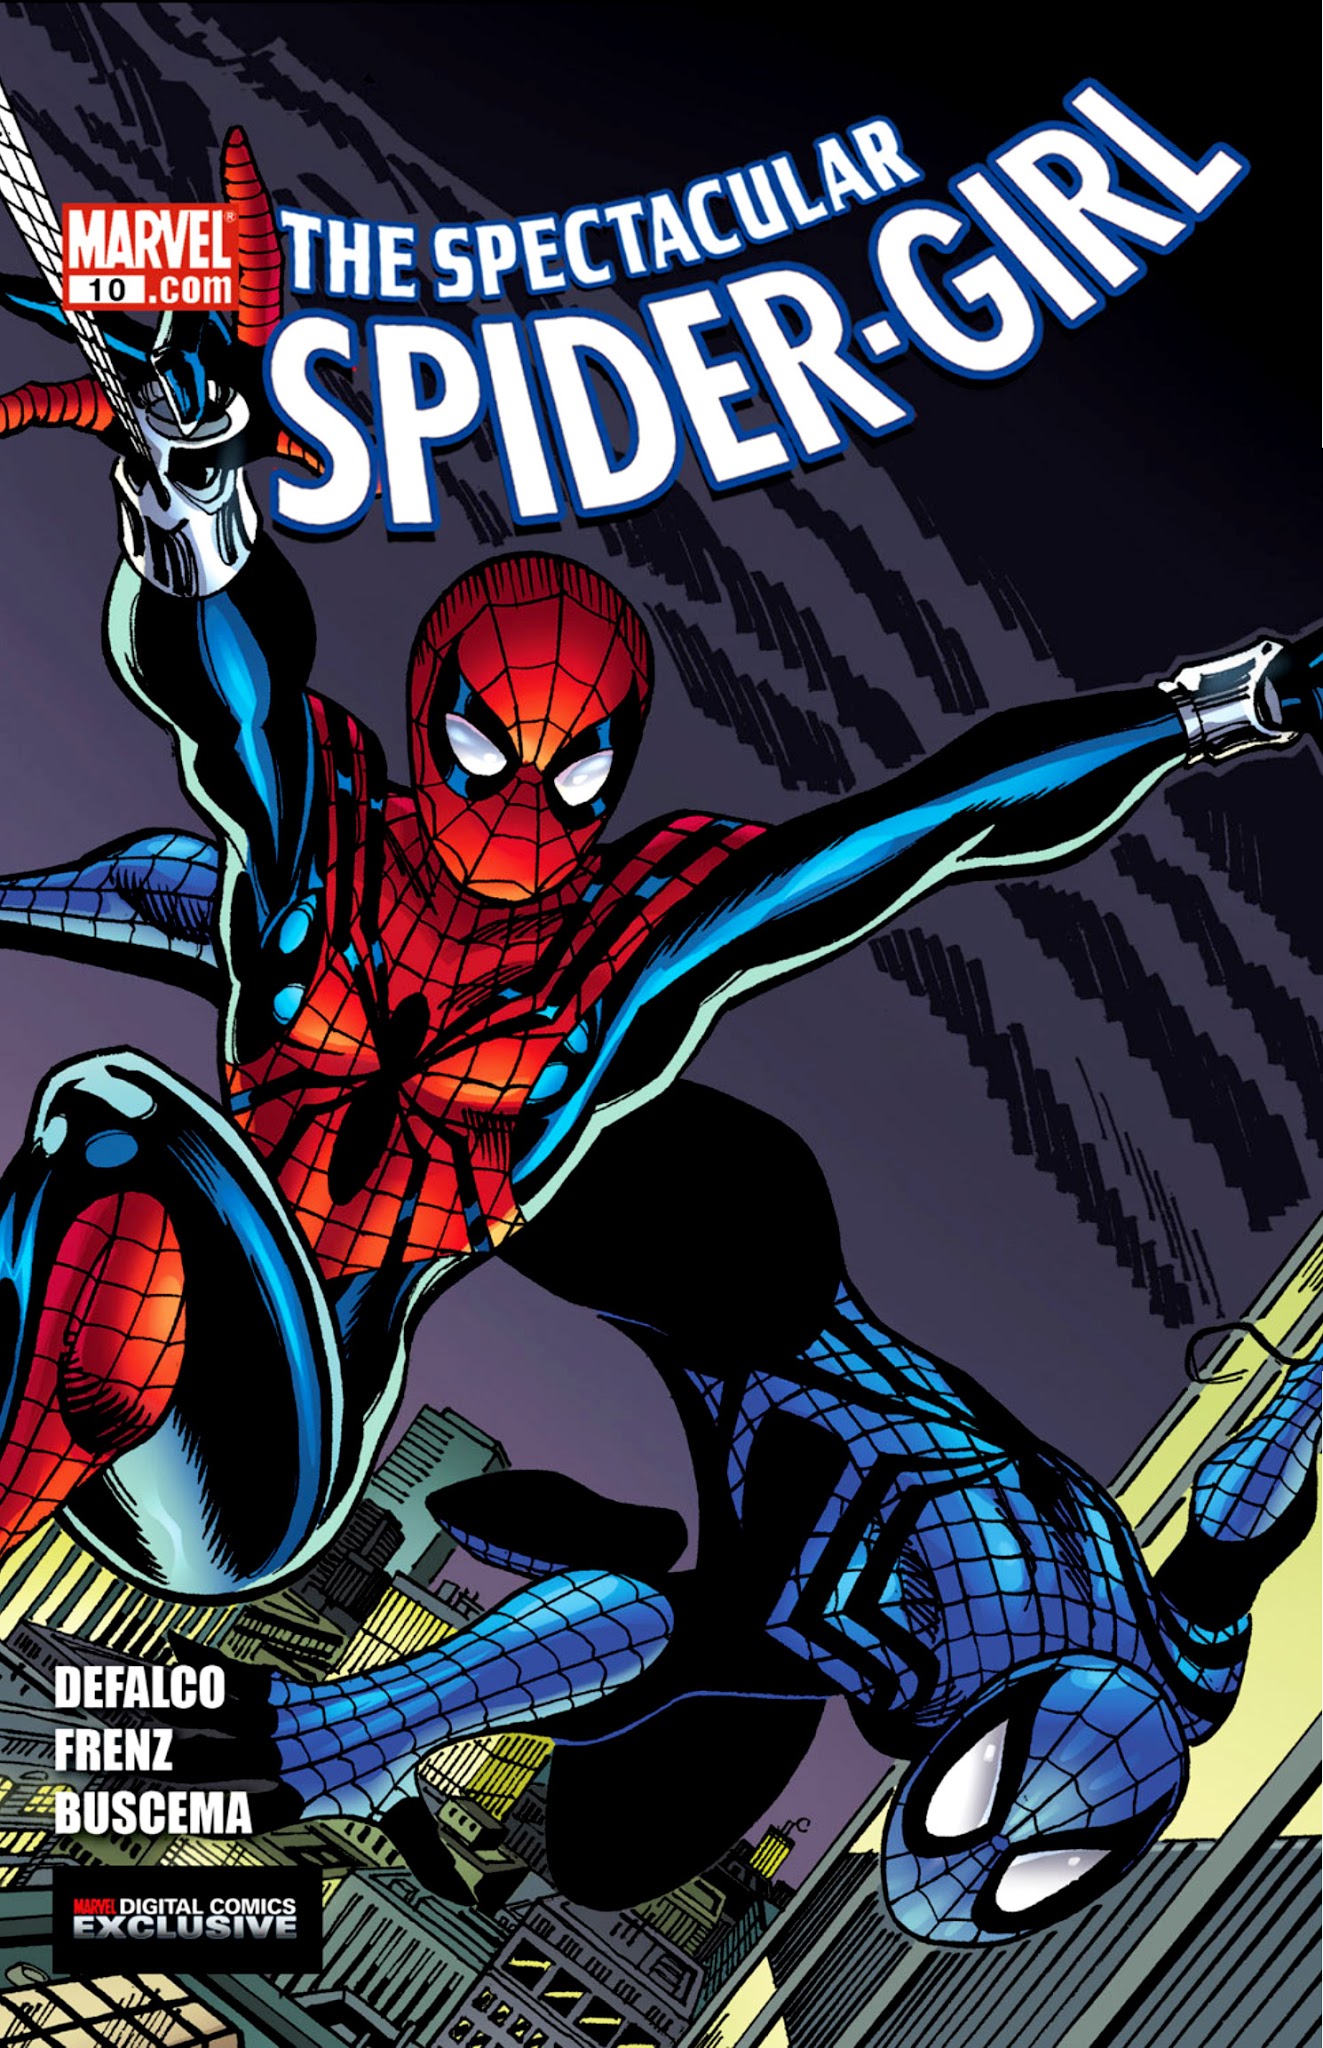 Read online The Spectacular Spider-Girl comic -  Issue #10 - 1